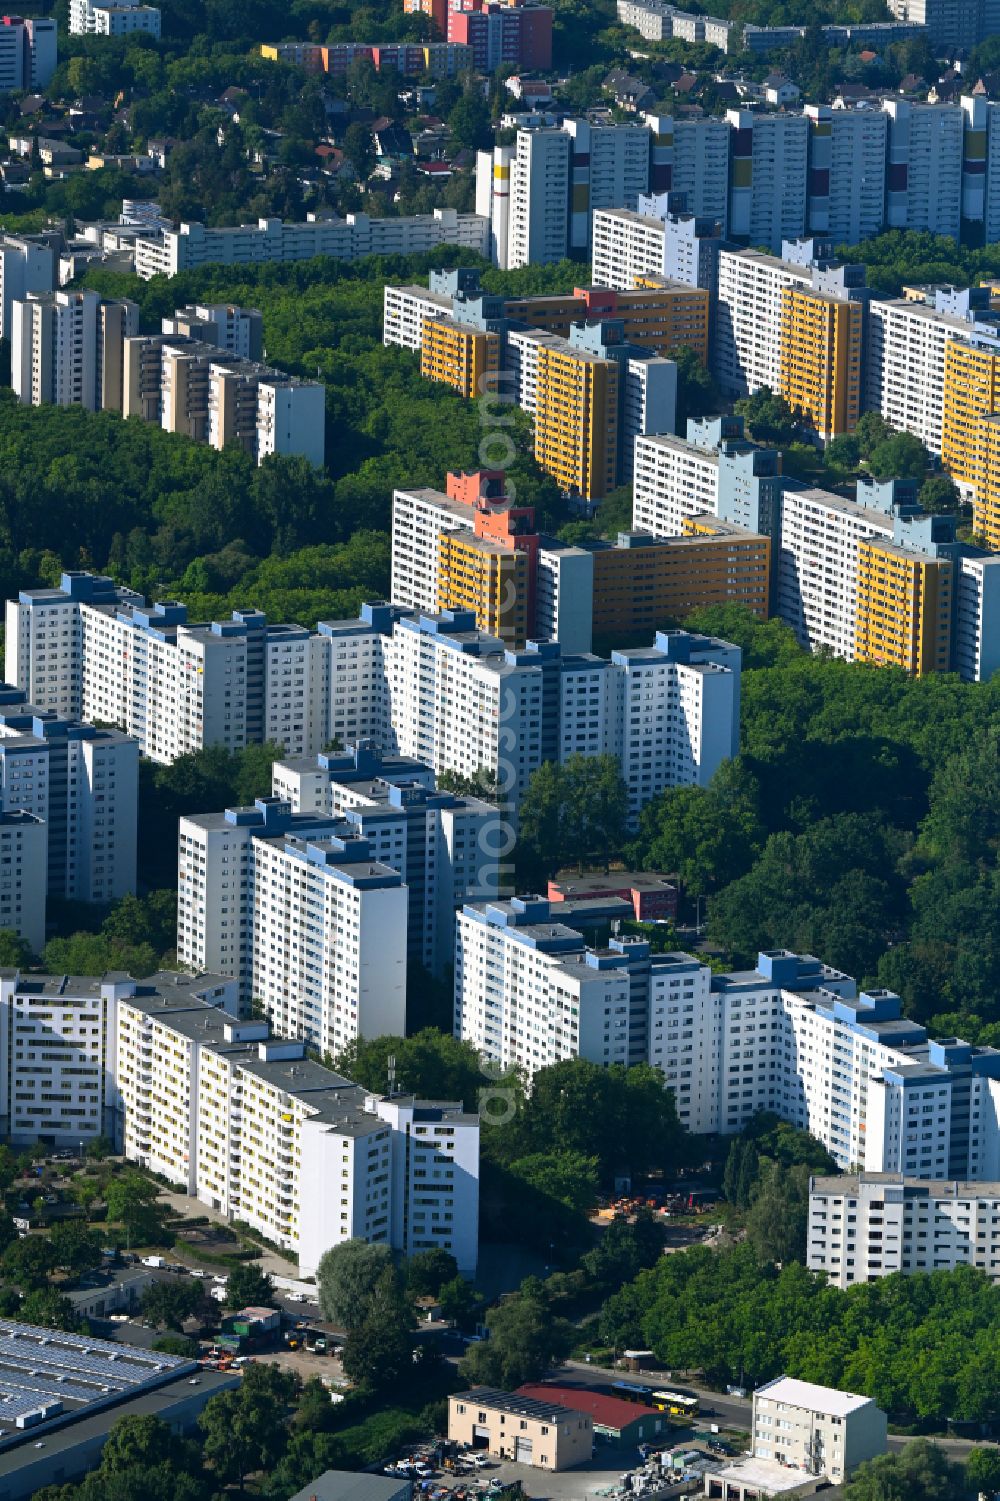 Aerial image Berlin - Skyscrapers in the residential area of industrially manufactured settlement on street Senftenberger Ring in the district Maerkisches Viertel in Berlin, Germany